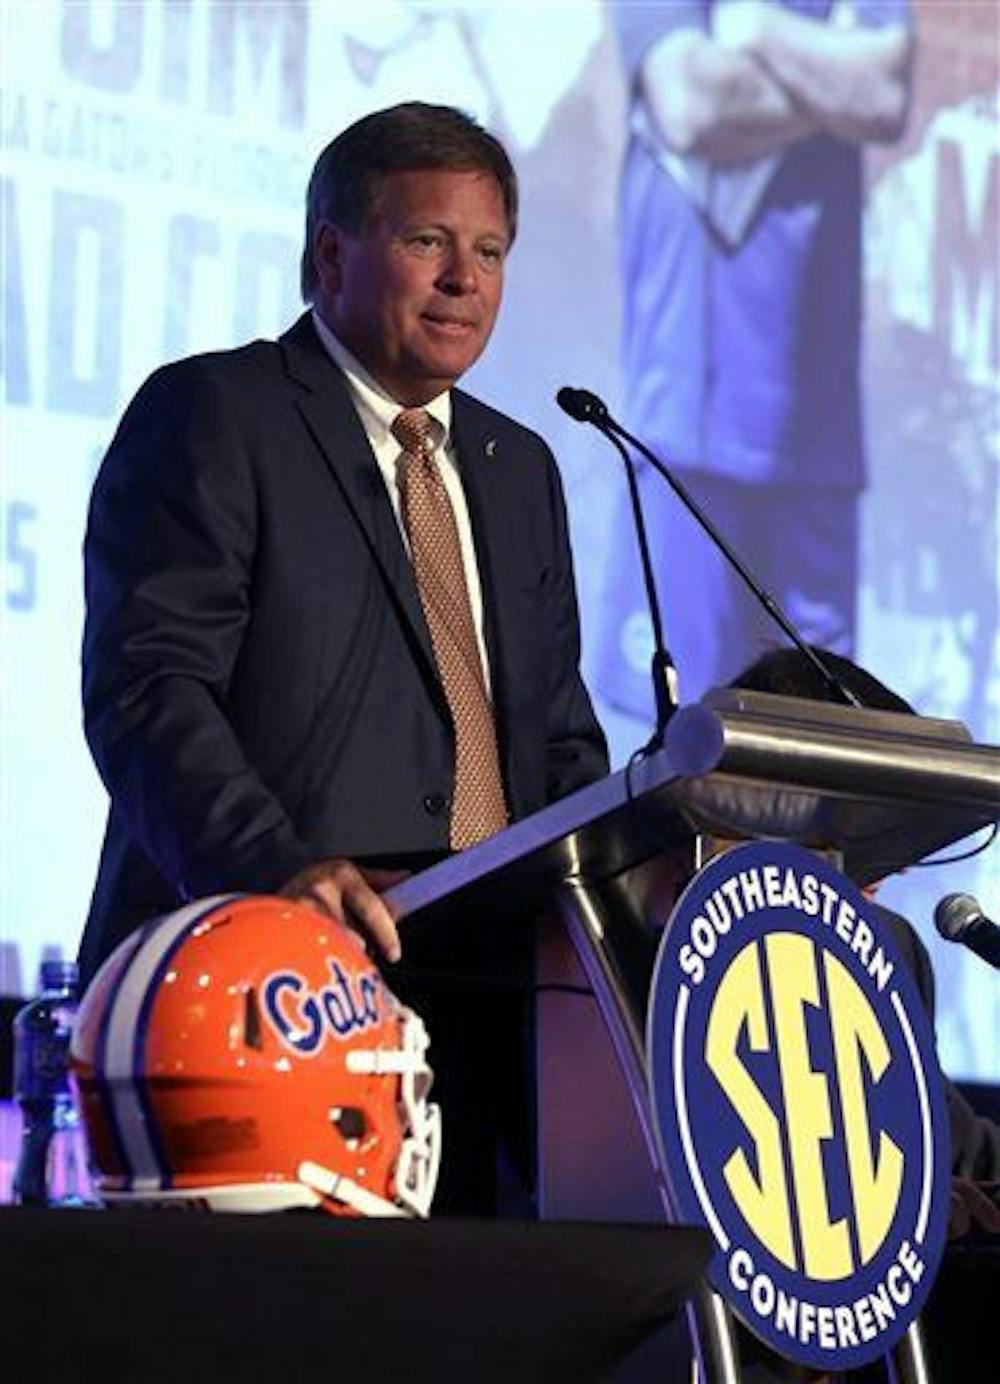 <p>Florida coach Jim McElwain speaks to the media during the NCAA college football Southeastern Conference Media Days, Monday, July 13, 2015, in Hoover, Ala. (AP Photo/Butch Dill)</p>